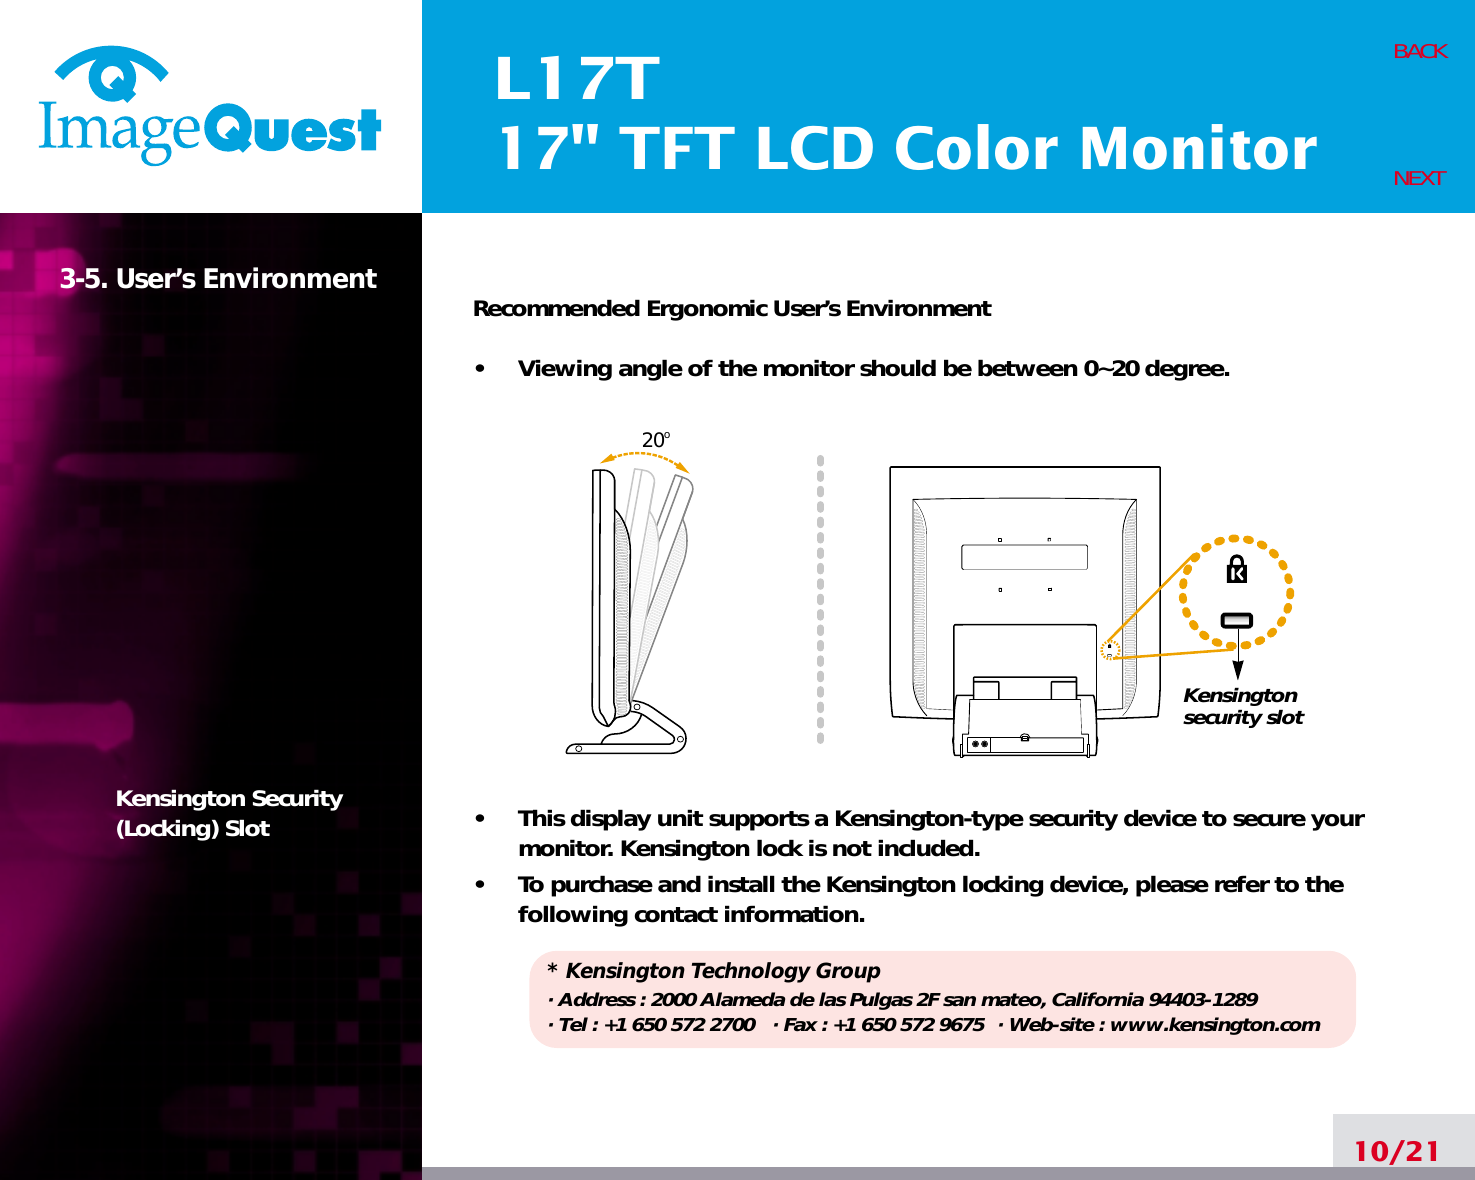 L17T17&quot; TFT LCD Color Monitor3-5. User’s EnvironmentKensington Security(Locking) SlotRecommended Ergonomic User’s Environment•     Viewing angle of the monitor should be between 0~20 degree.•     This display unit supports a Kensington-type security device to secure yourmonitor. Kensington lock is not included.•     To purchase and install the Kensington locking device, please refer to thefollowing contact information.* Kensington Technology Group· Address : 2000 Alameda de las Pulgas 2F san mateo, California 94403-1289· Tel : +1 650 572 2700 · Fax : +1 650 572 9675 · Web-site : www.kensington.com10/21BACKNEXT20oKensington security slot